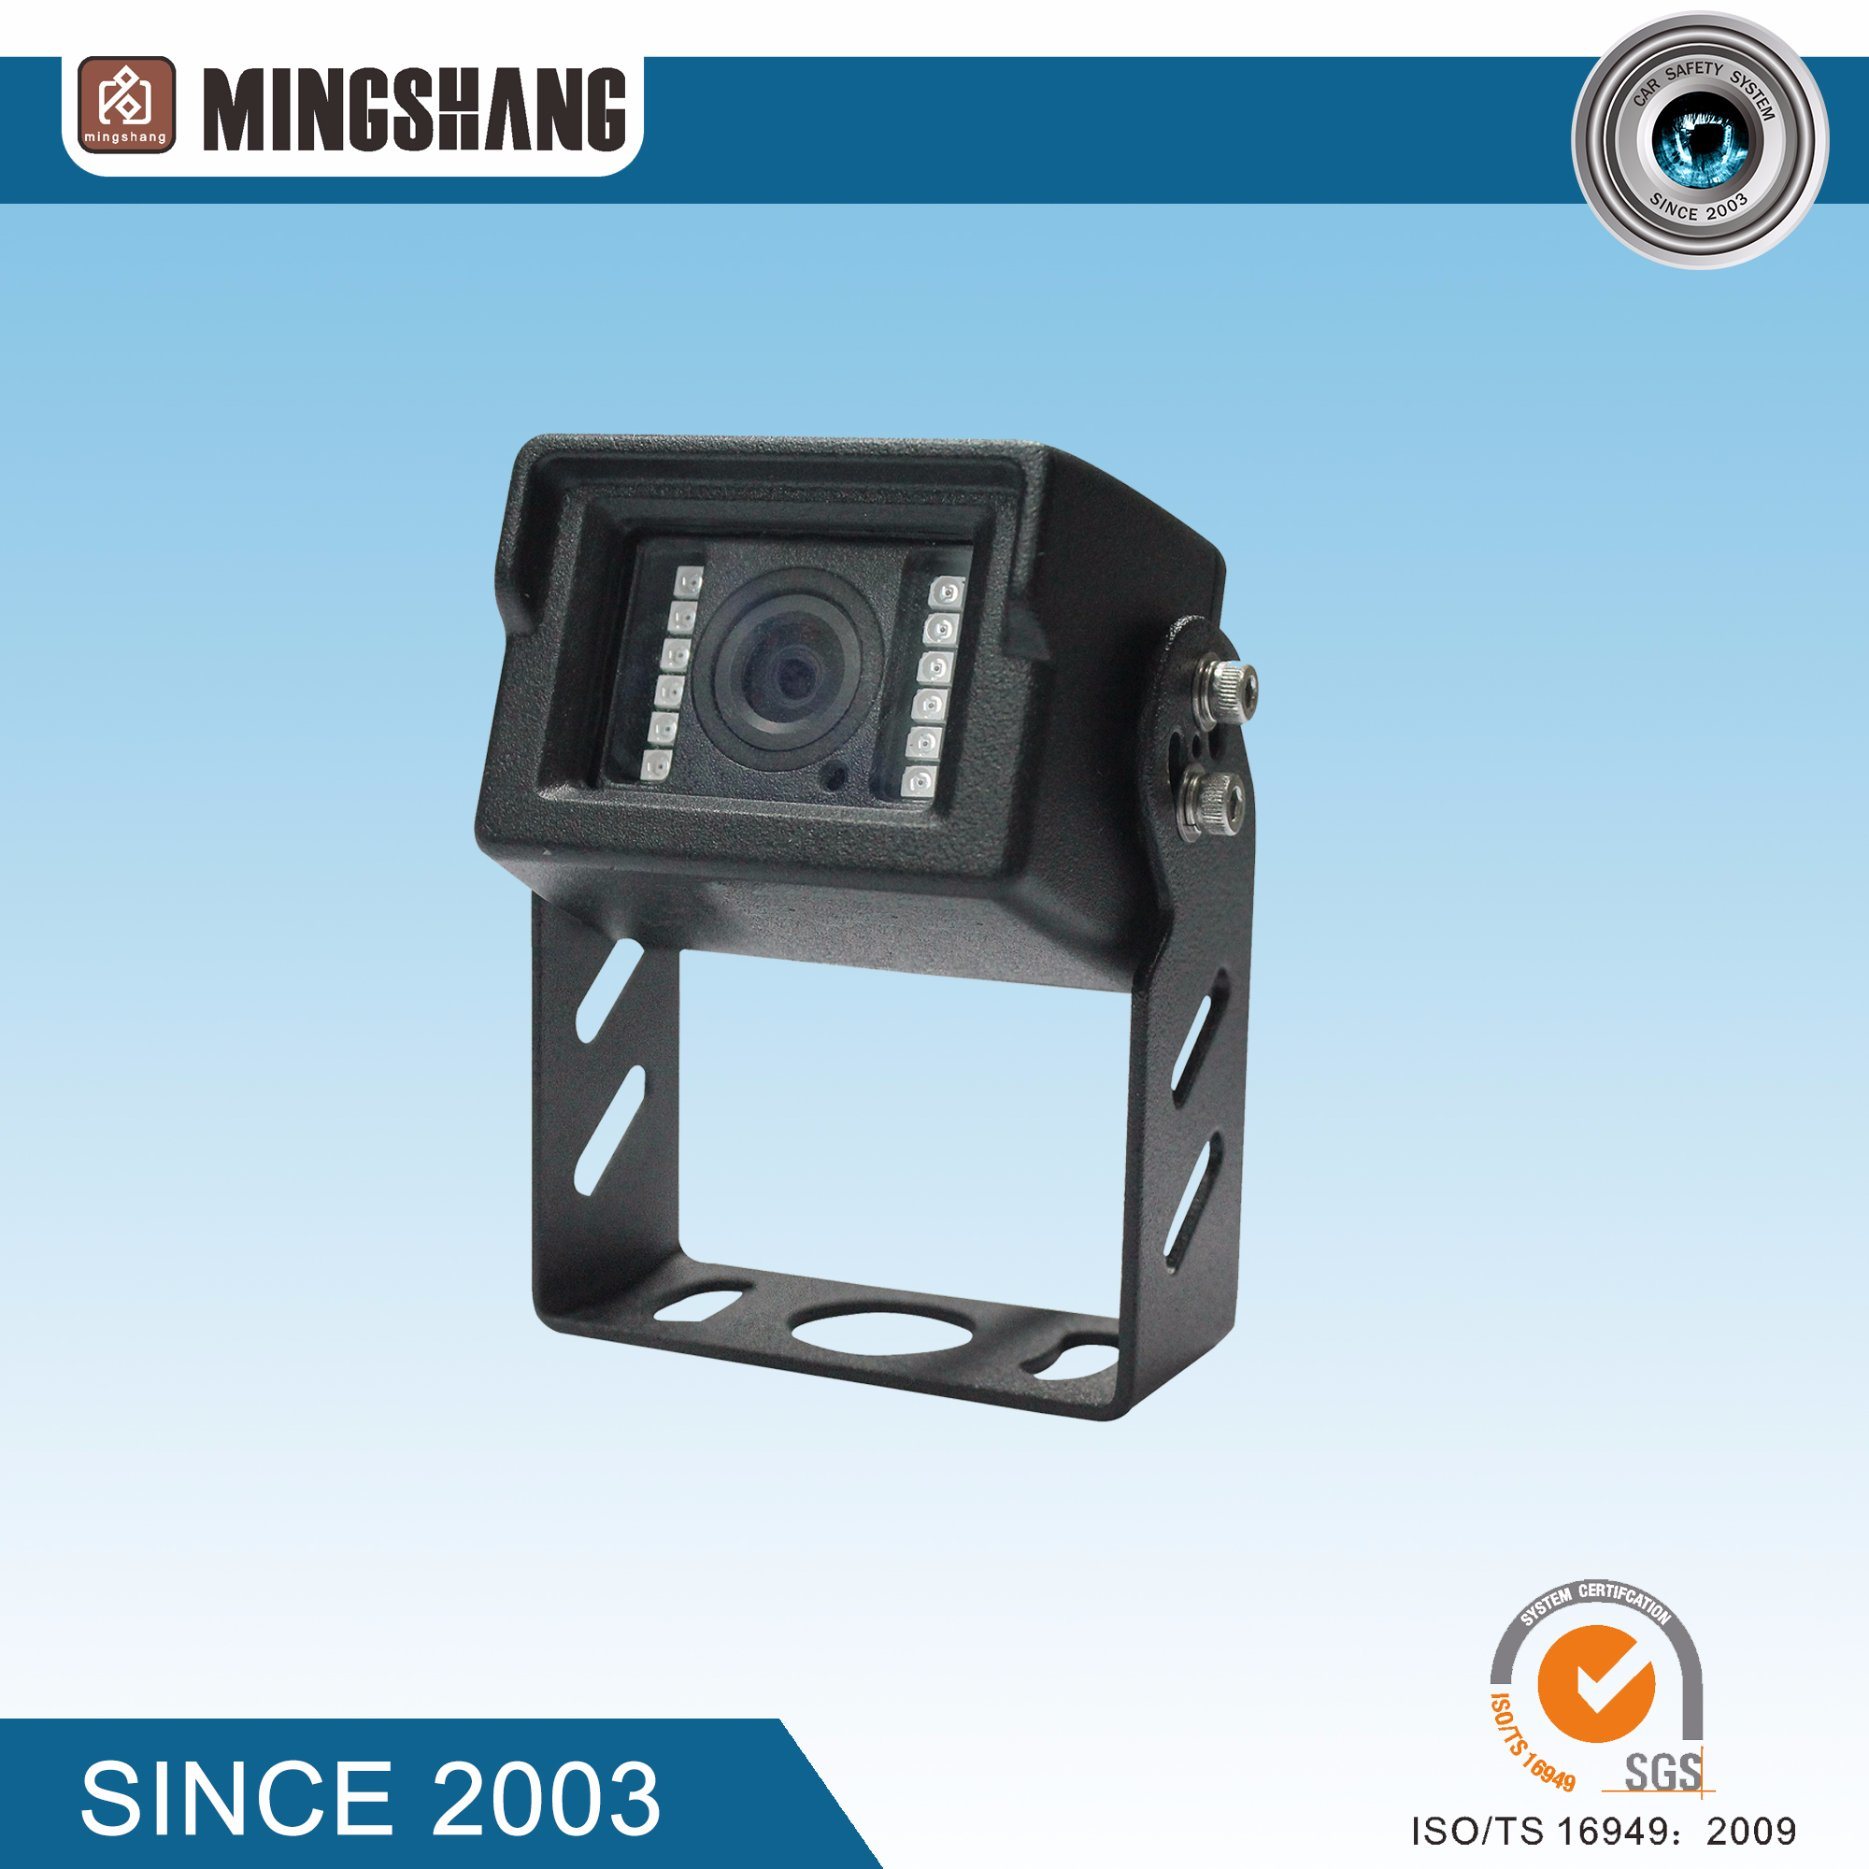 Rear View Camera for Farm Agricultural Machinery, Backhoe Loader Vision Safety